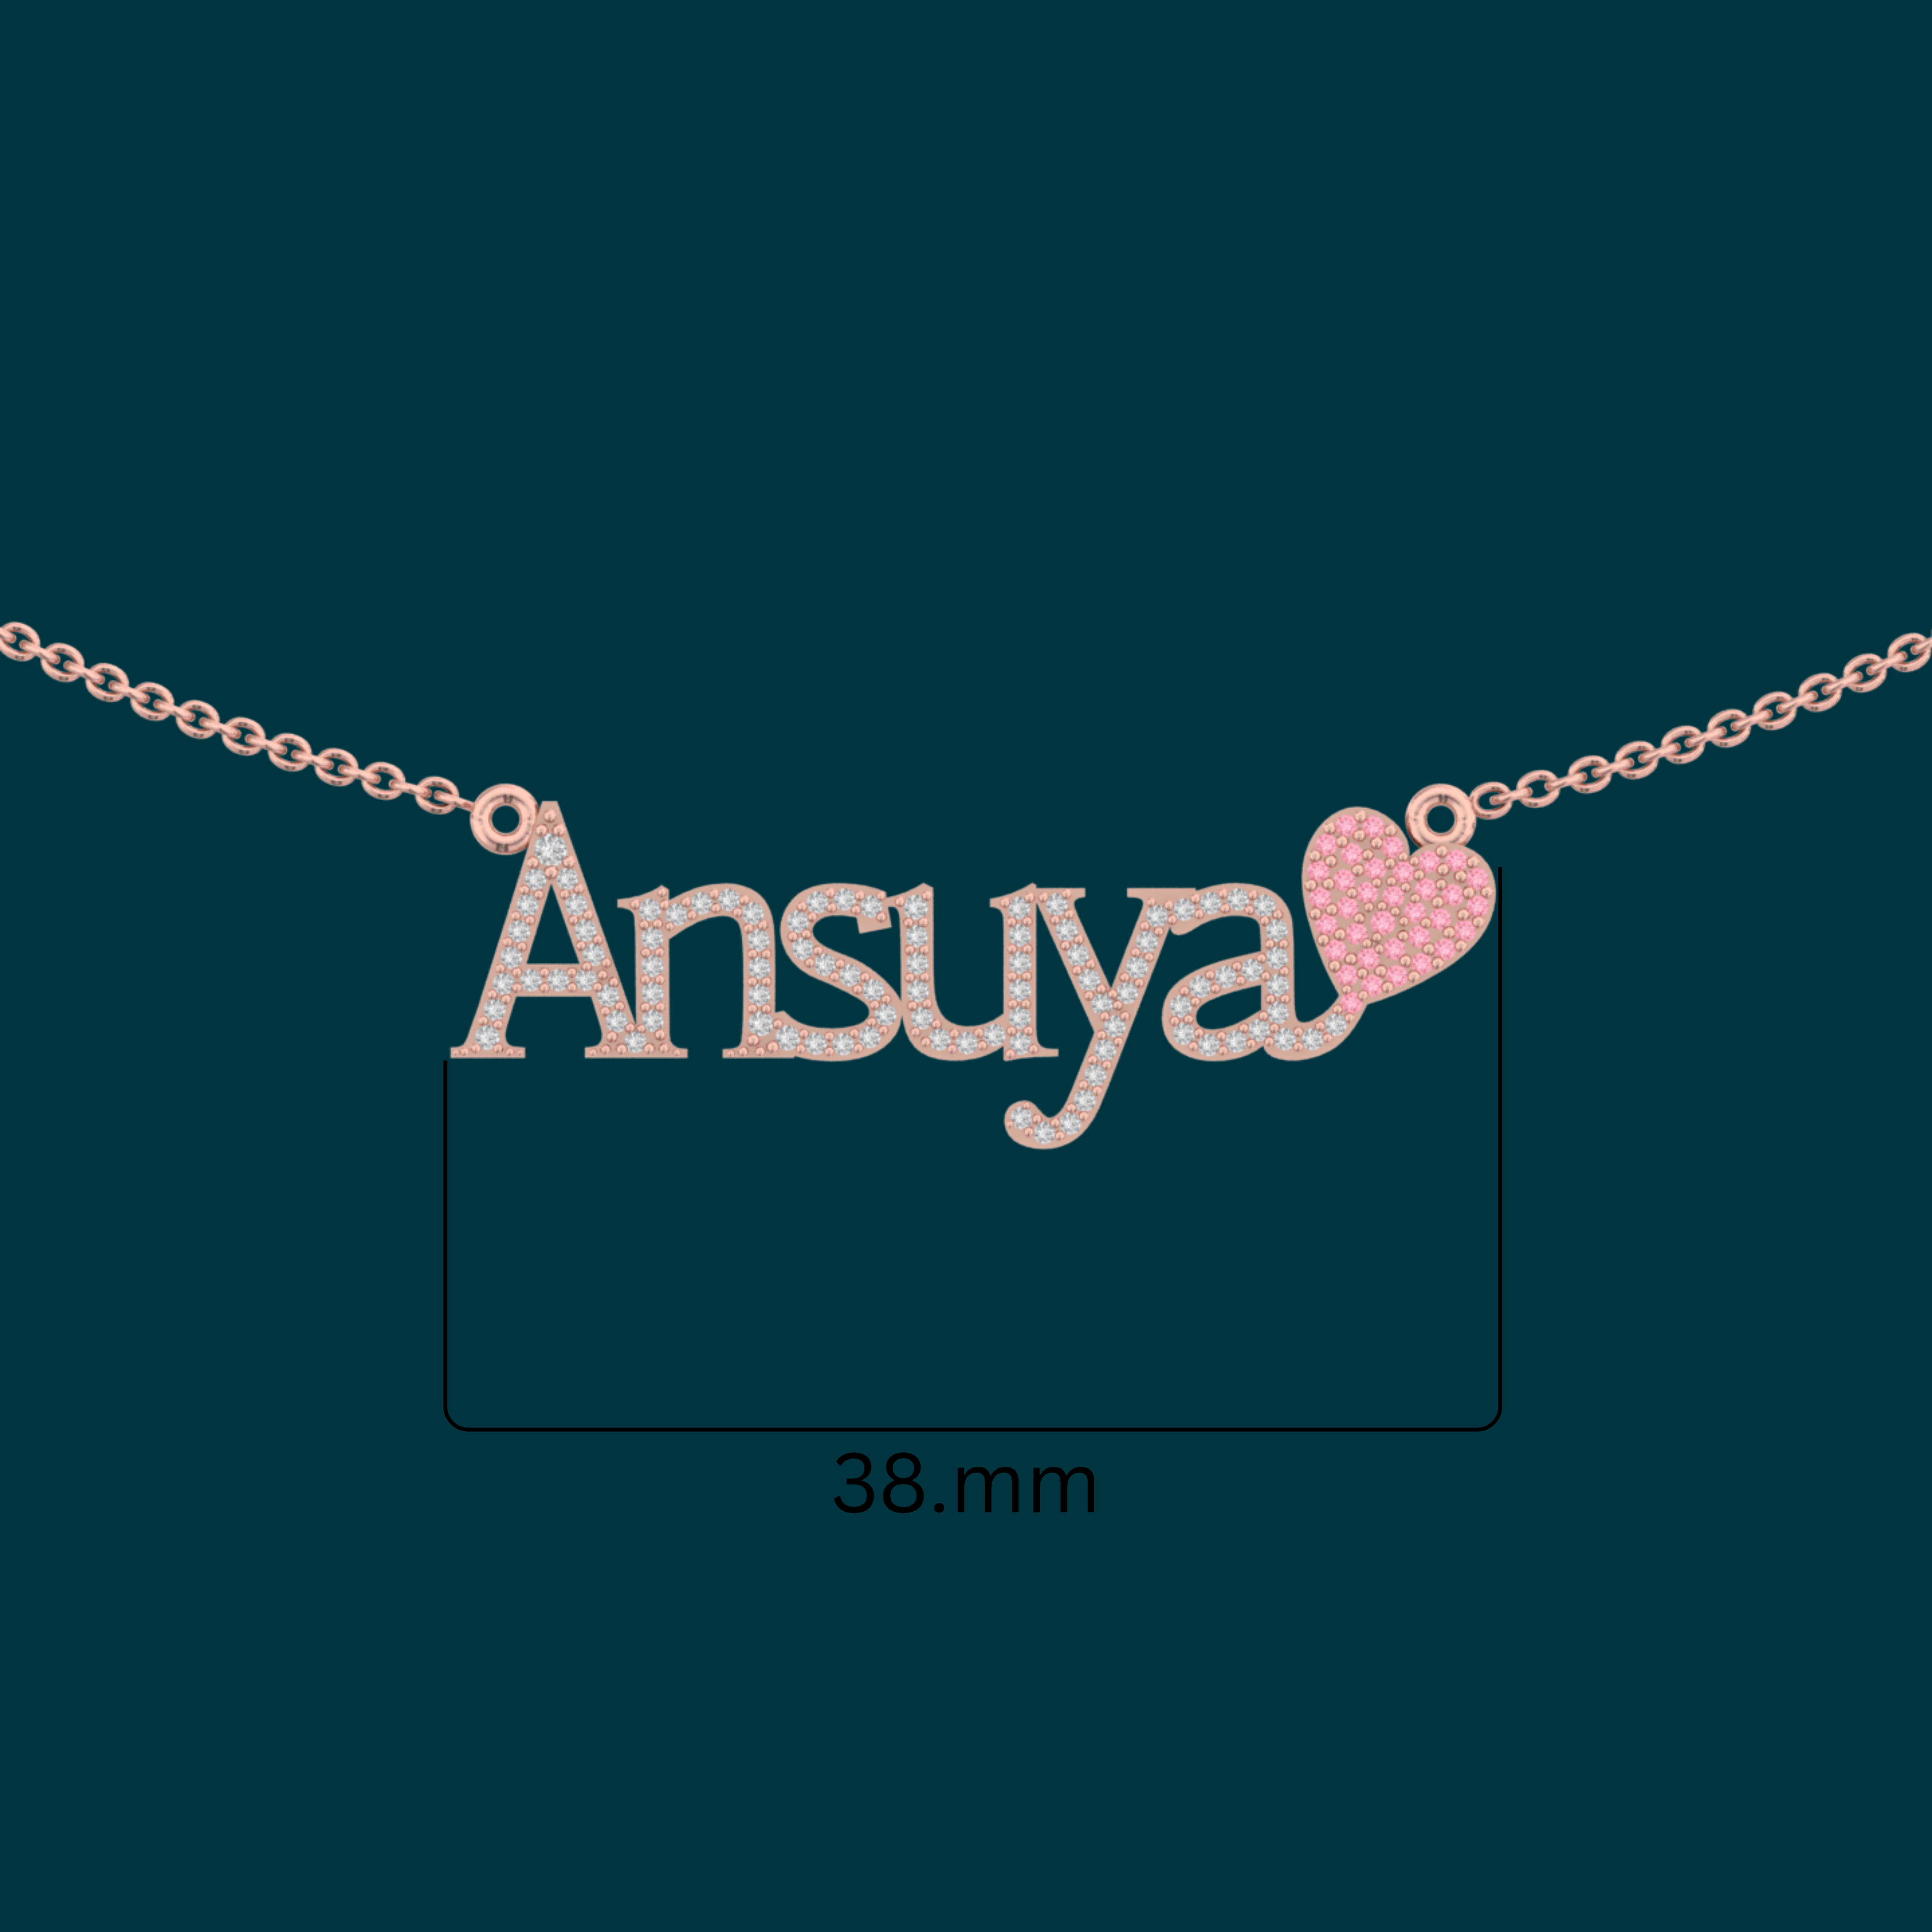 92.5 sterling silver custom hubby/ baby/ BFF name Customized Diamond Pendant with chain/ Moissanite Handmade Special Name band /long distance promise gift for love/ Special one person name Diamond Pendant with chain/ minimalist Diamond pendant chain